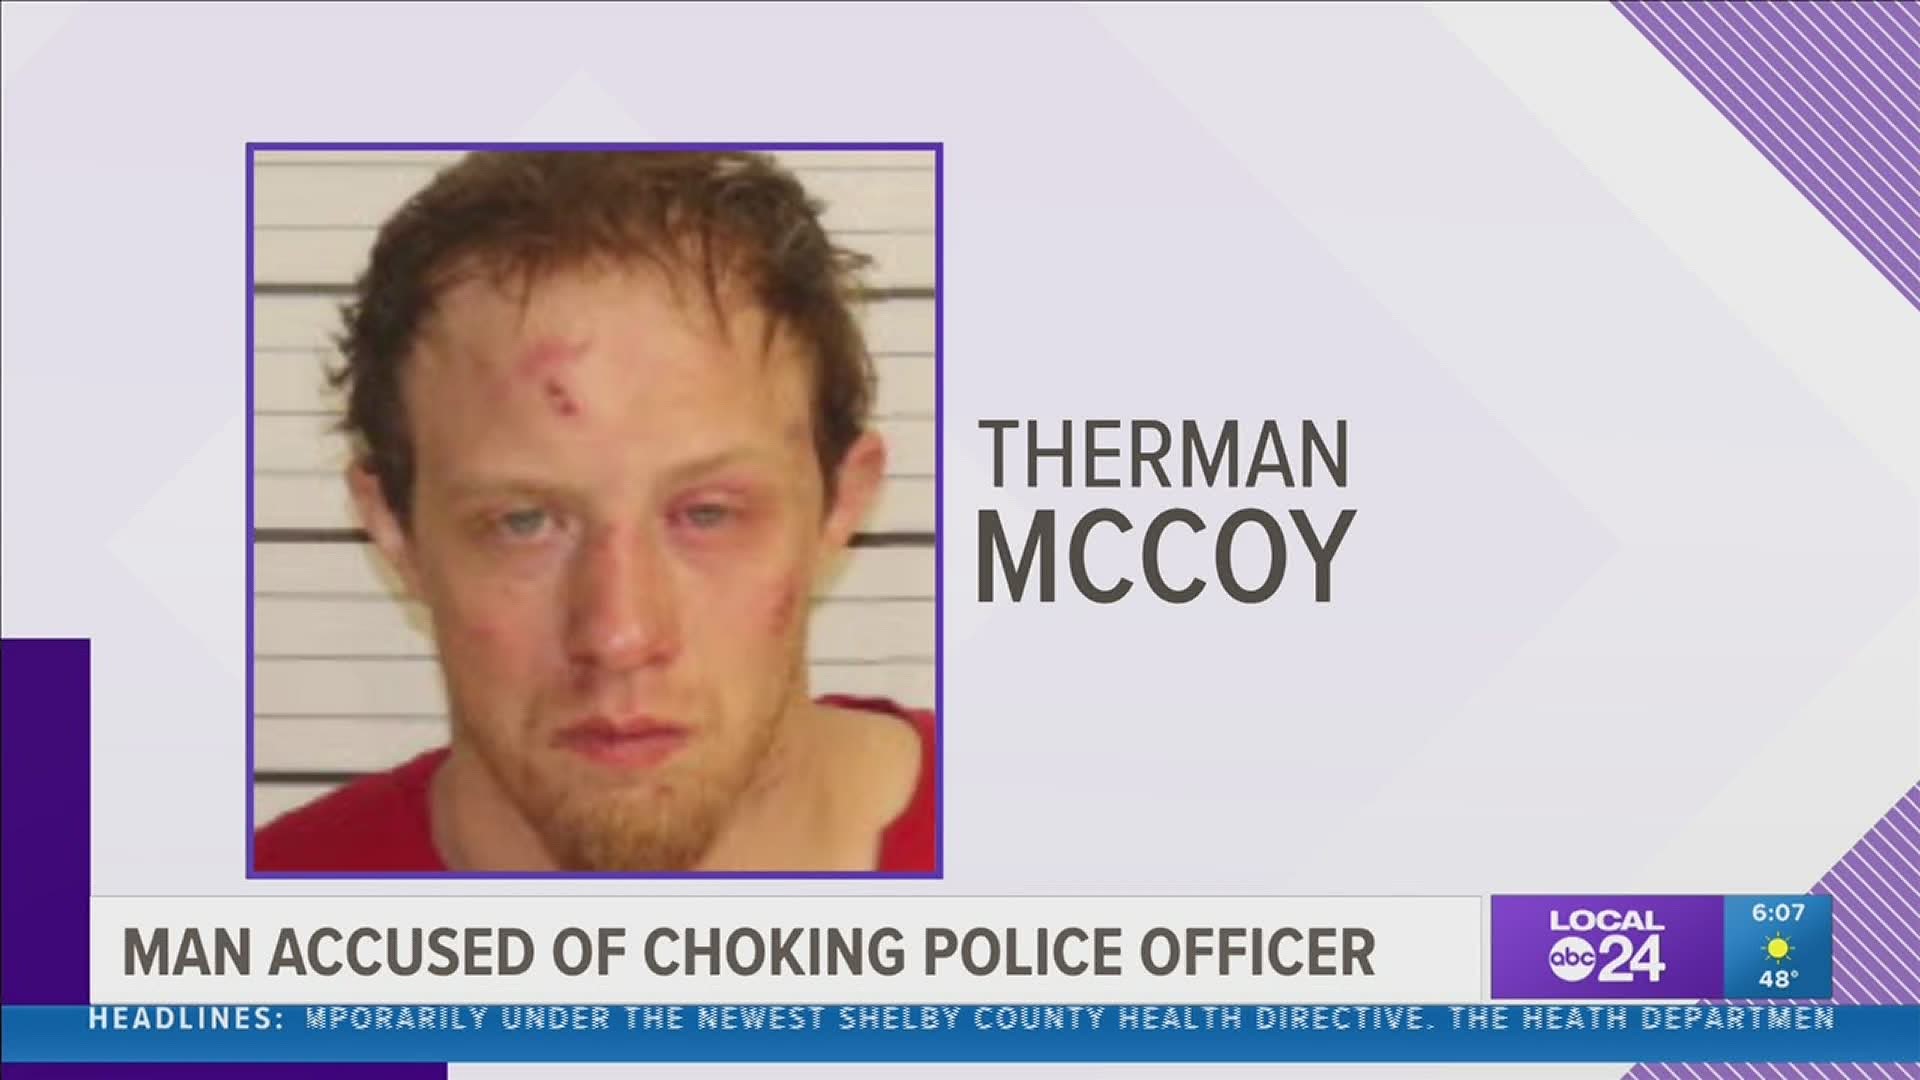 It all happened when officers said they found Therman McCoy trying to break into a car in north Memphis.